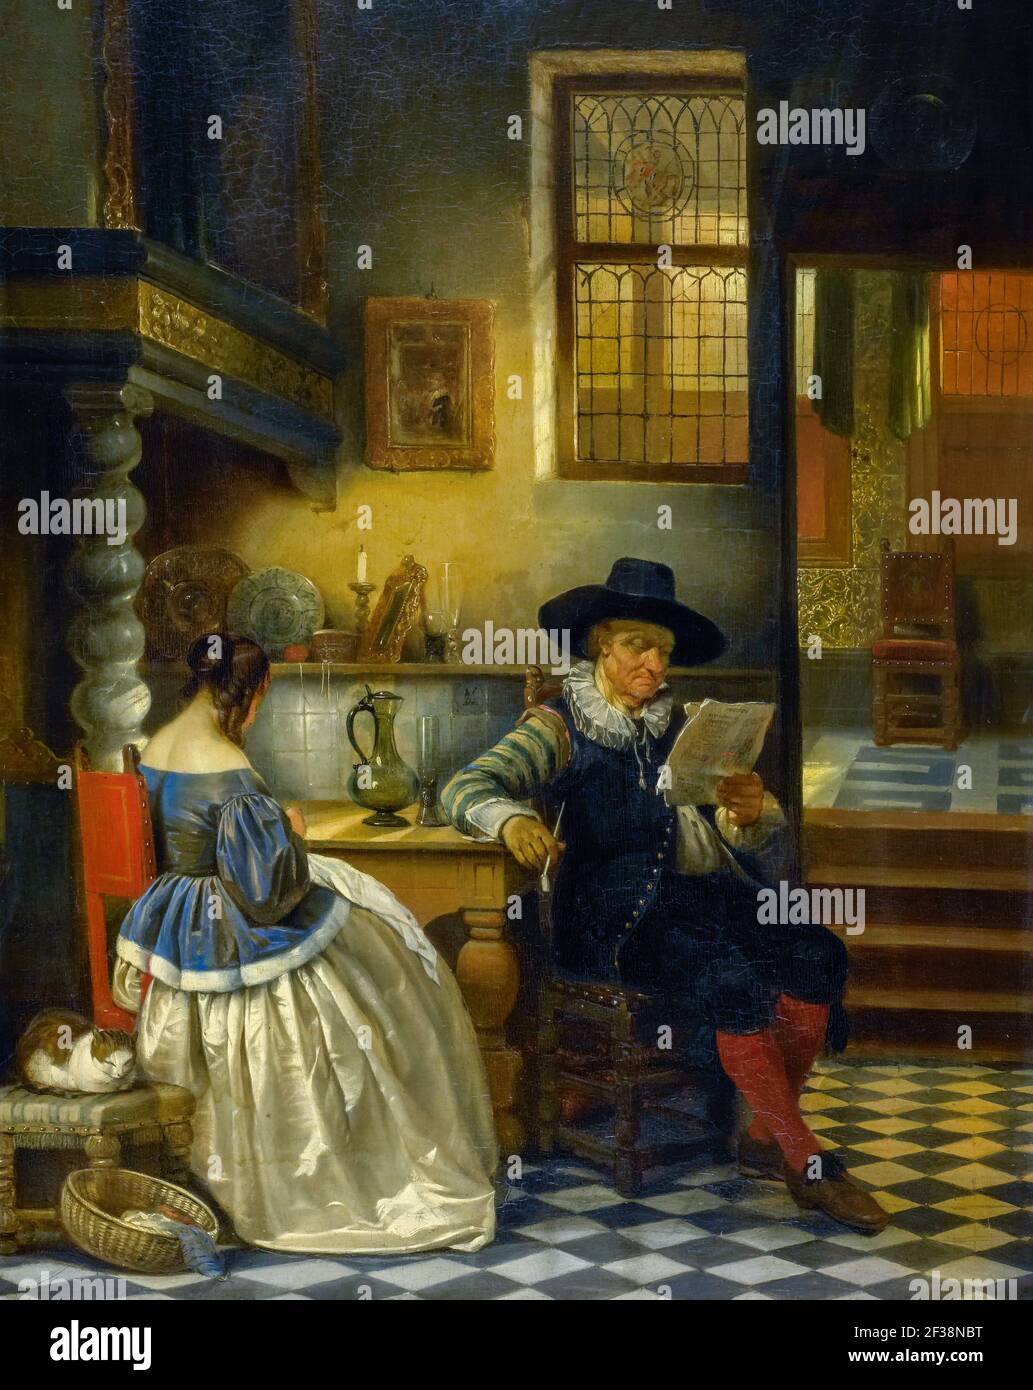 Interior with a man and a woman seated at a table. The man has a pipe in his hand and is reading a short of a pamphlet. The woman is doing needlework Stock Photo